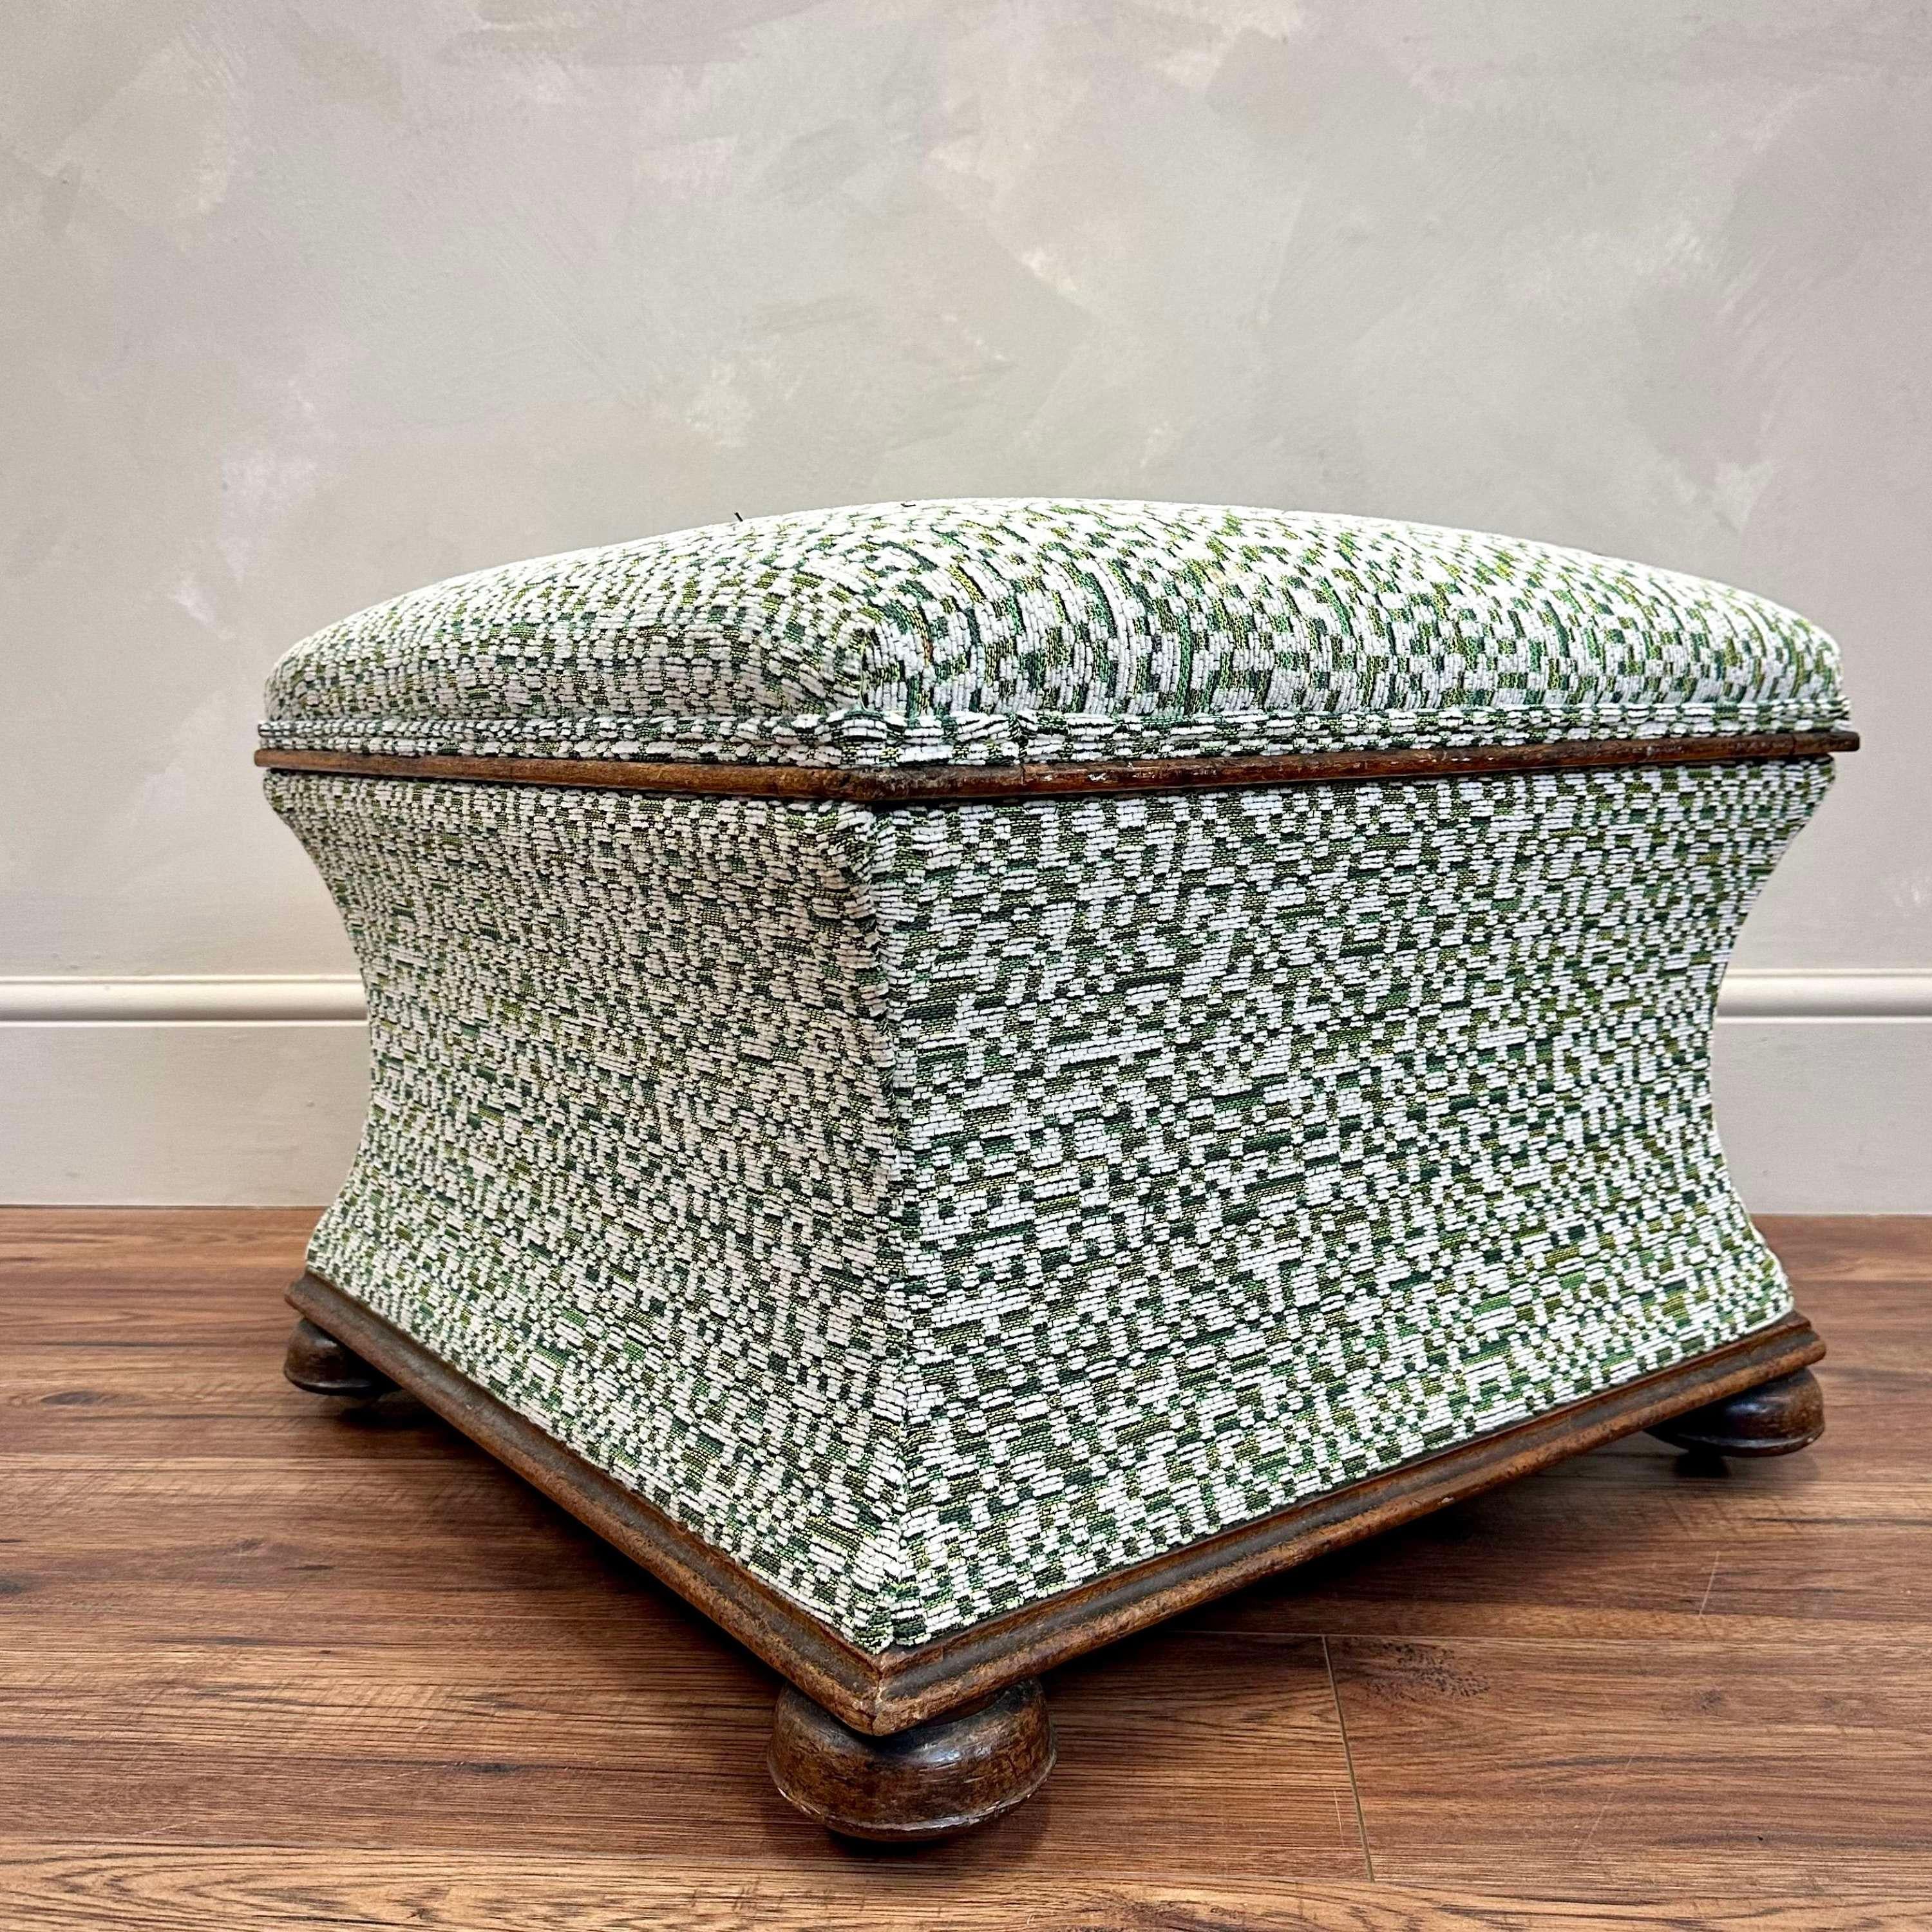 19th Century English upholstered Ottoman Footstool For Sale 3